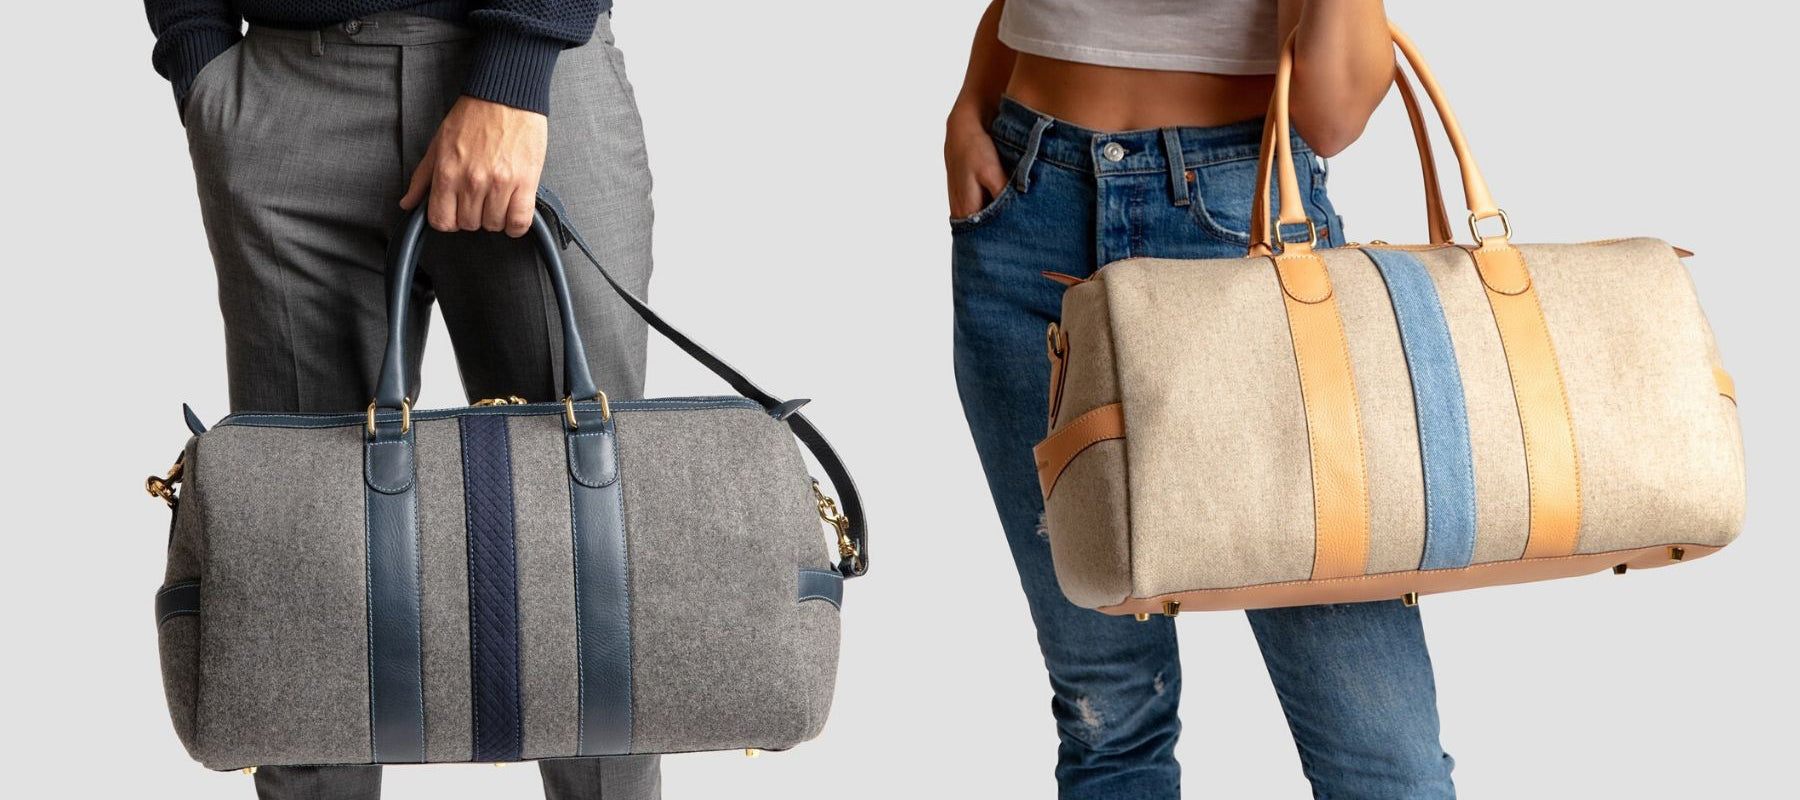 The World’s Most Affordable Luxury Weekender Bag